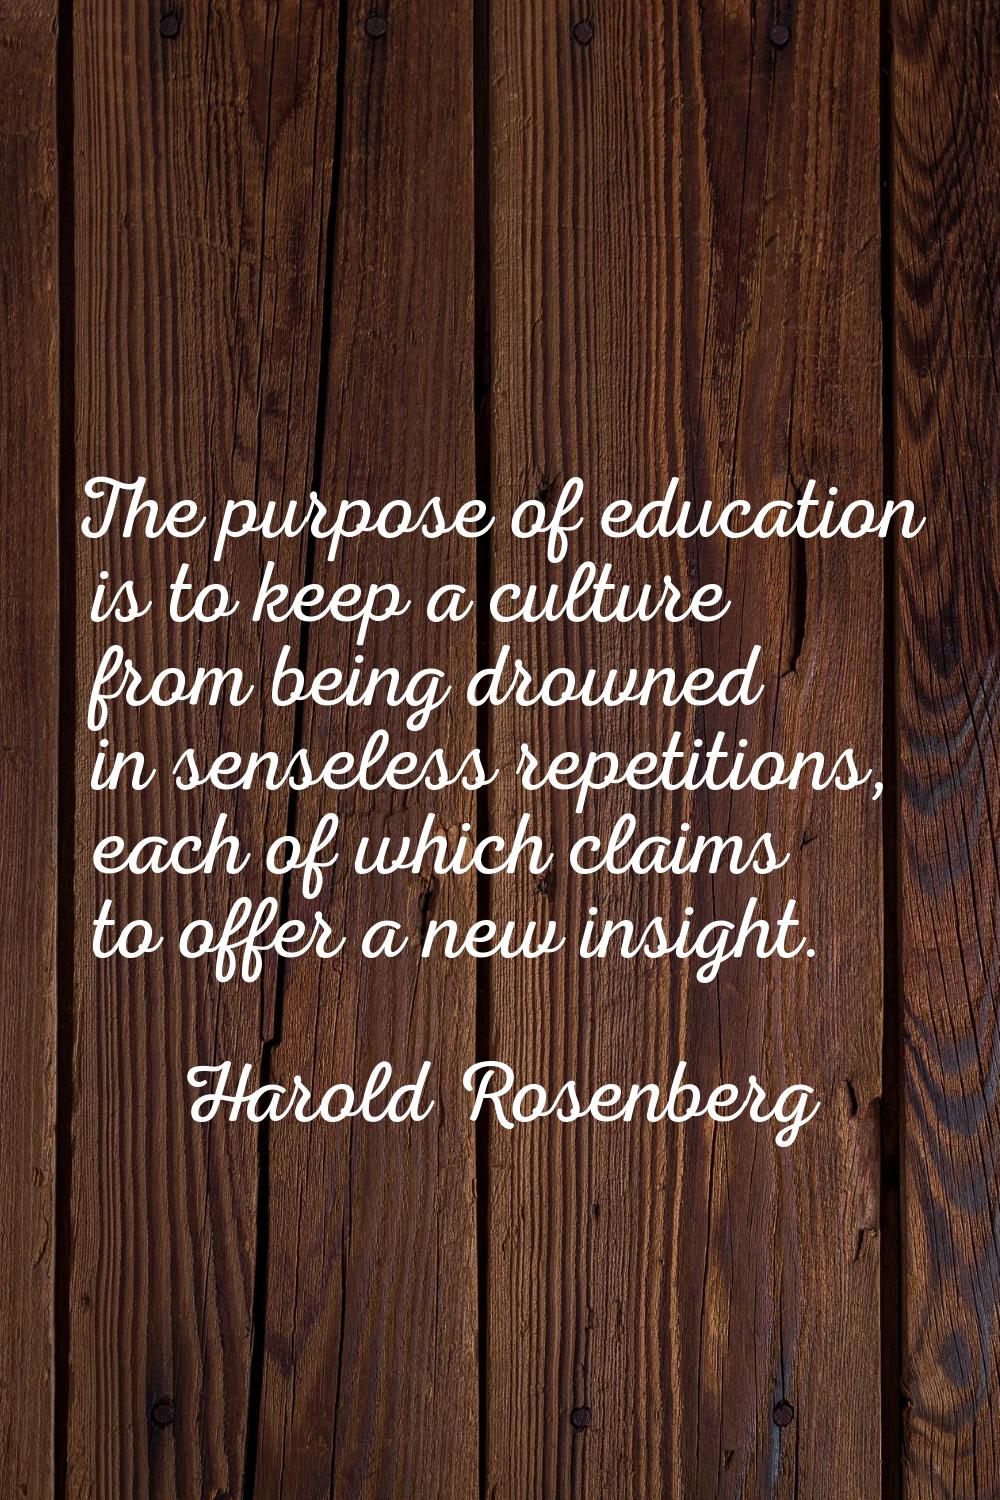 The purpose of education is to keep a culture from being drowned in senseless repetitions, each of 